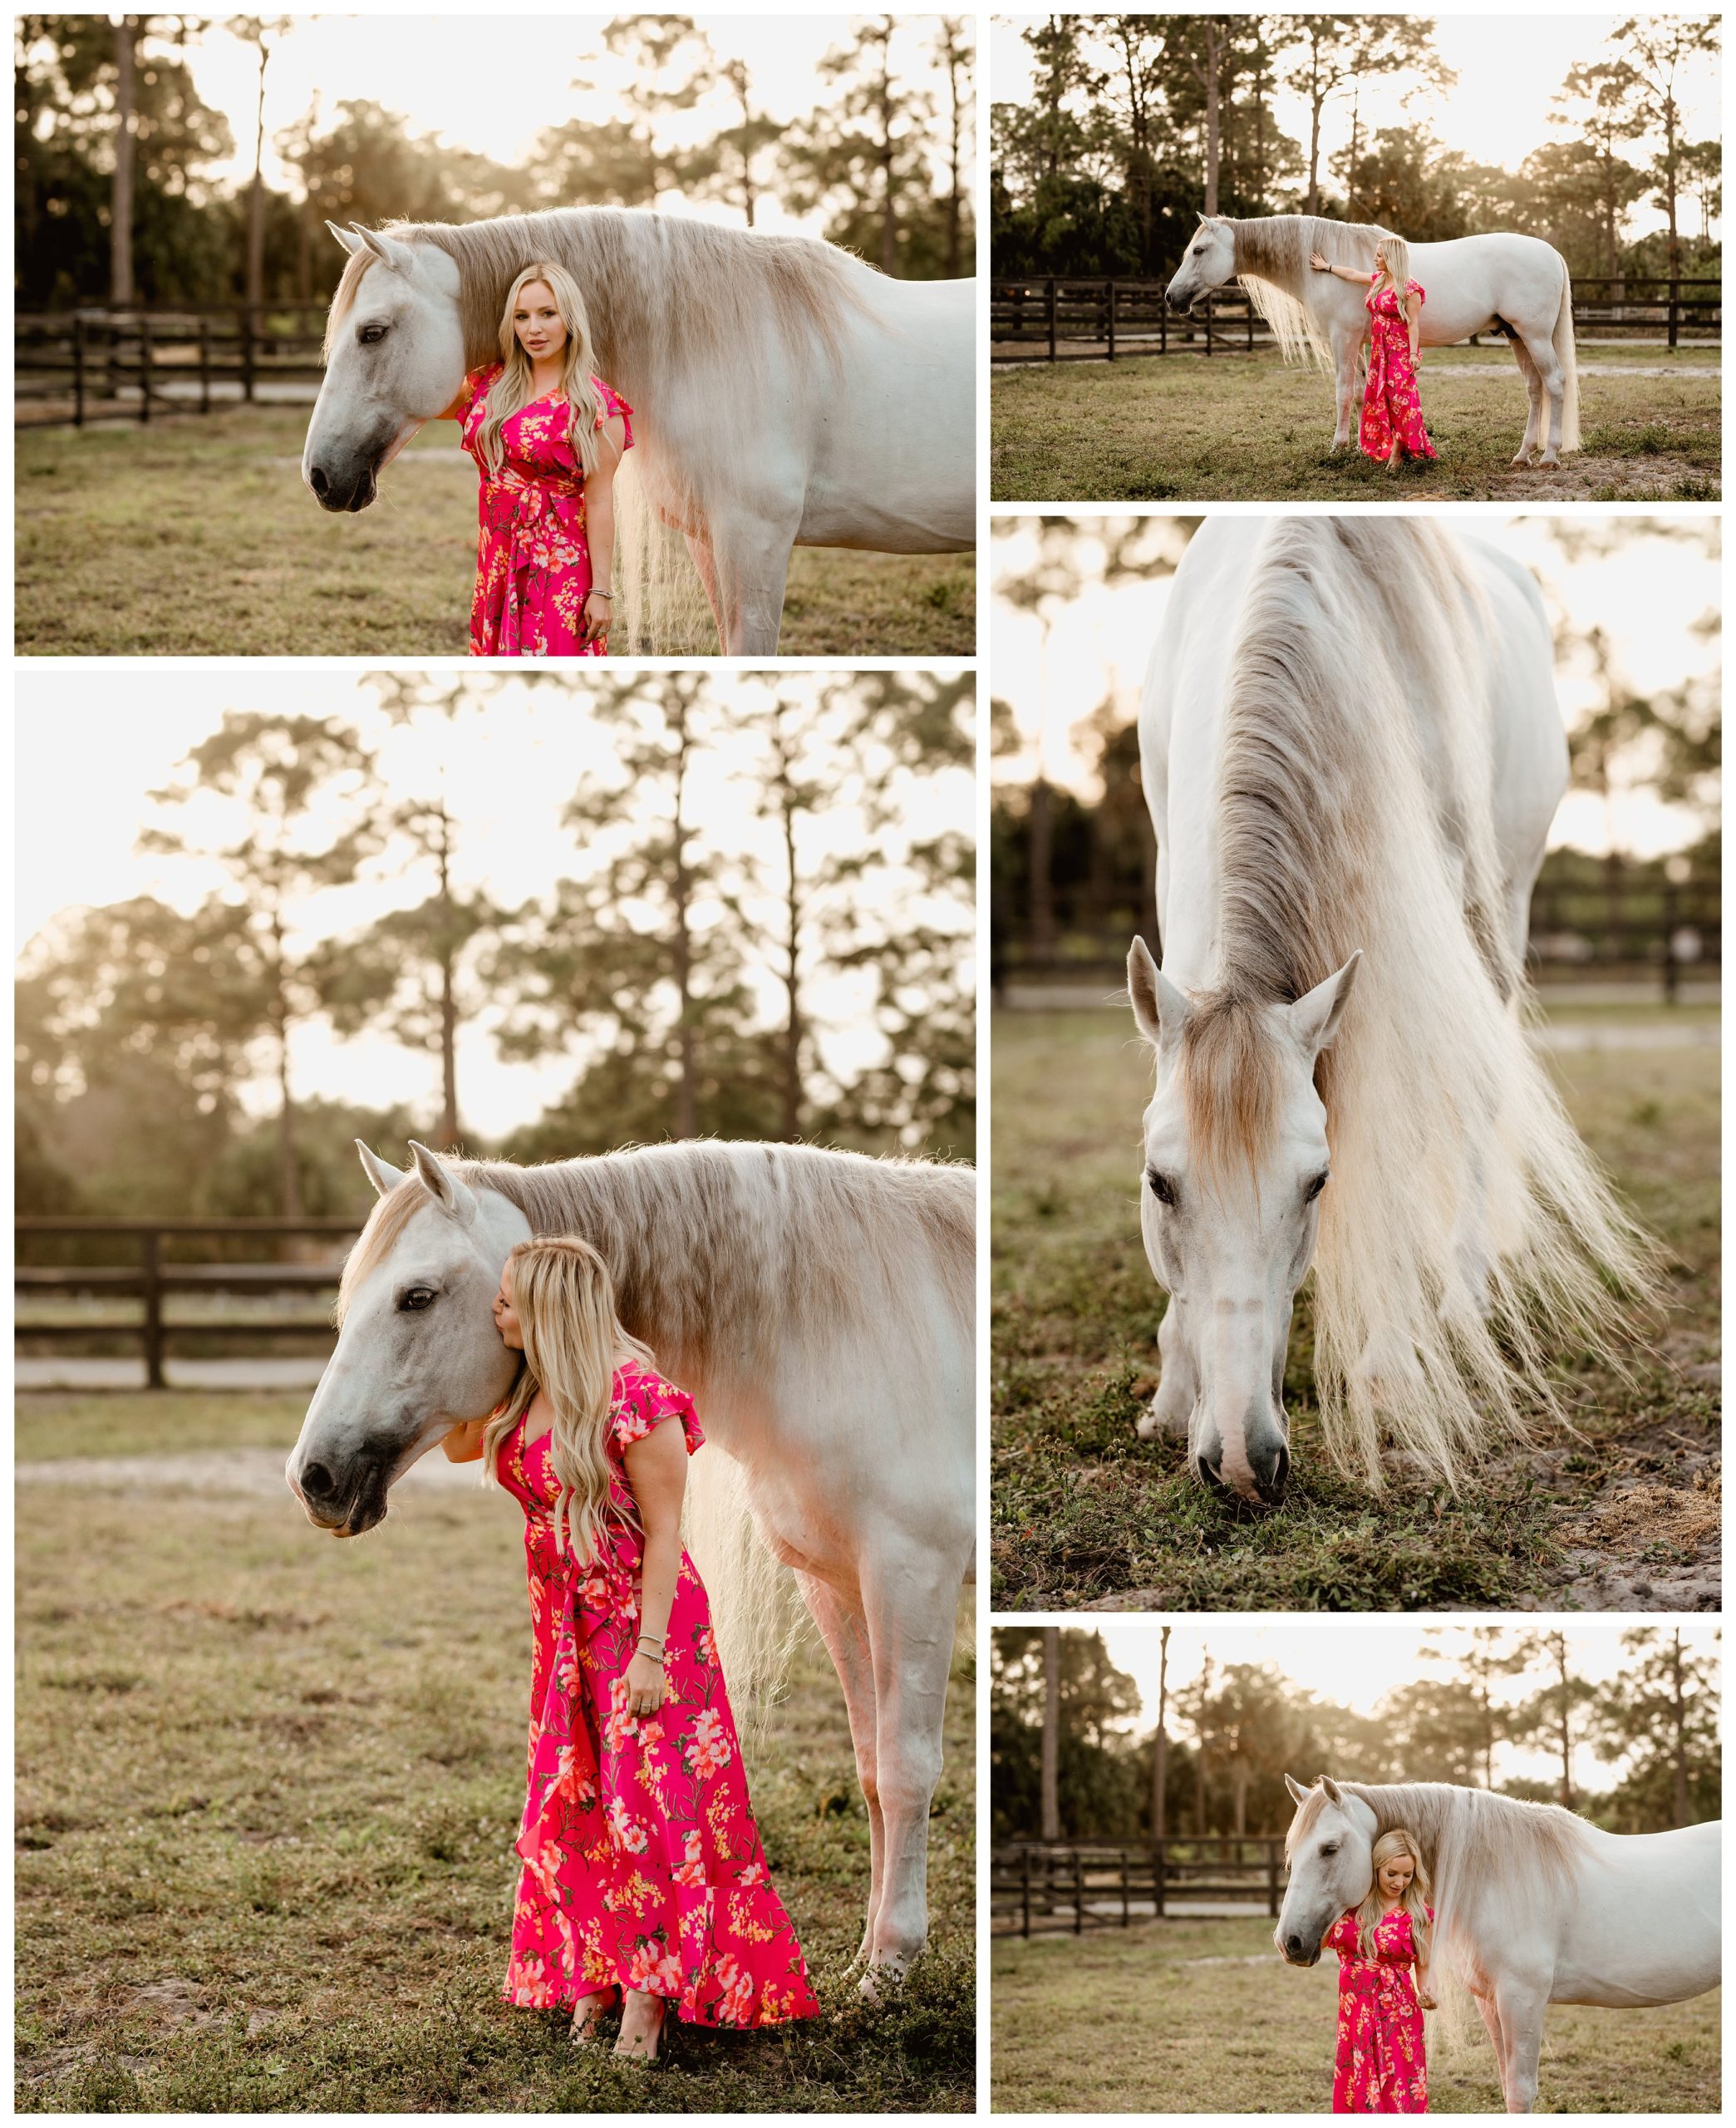 Posing ideas for girls with their horse